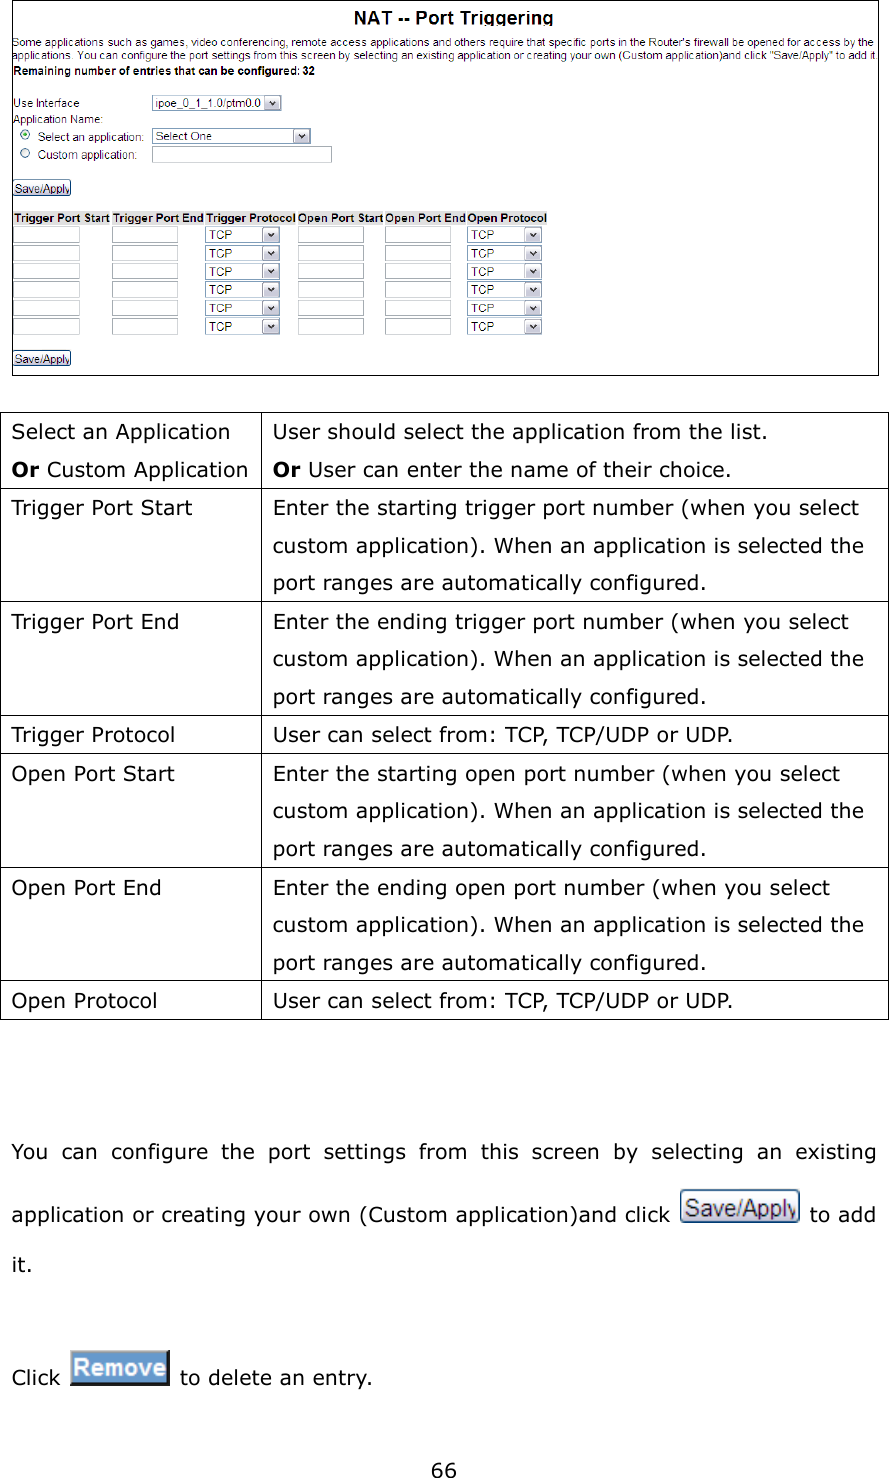 66    You  can  configure  the  port  settings  from  this  screen  by  selecting  an  existing application or creating your own (Custom application)and click    to add it.  Click    to delete an entry. Select an Application Or Custom Application User should select the application from the list. Or User can enter the name of their choice. Trigger Port Start  Enter the starting trigger port number (when you select custom application). When an application is selected the port ranges are automatically configured. Trigger Port End  Enter the ending trigger port number (when you select custom application). When an application is selected the port ranges are automatically configured. Trigger Protocol  User can select from: TCP, TCP/UDP or UDP. Open Port Start  Enter the starting open port number (when you select custom application). When an application is selected the port ranges are automatically configured. Open Port End  Enter the ending open port number (when you select custom application). When an application is selected the port ranges are automatically configured. Open Protocol  User can select from: TCP, TCP/UDP or UDP. 